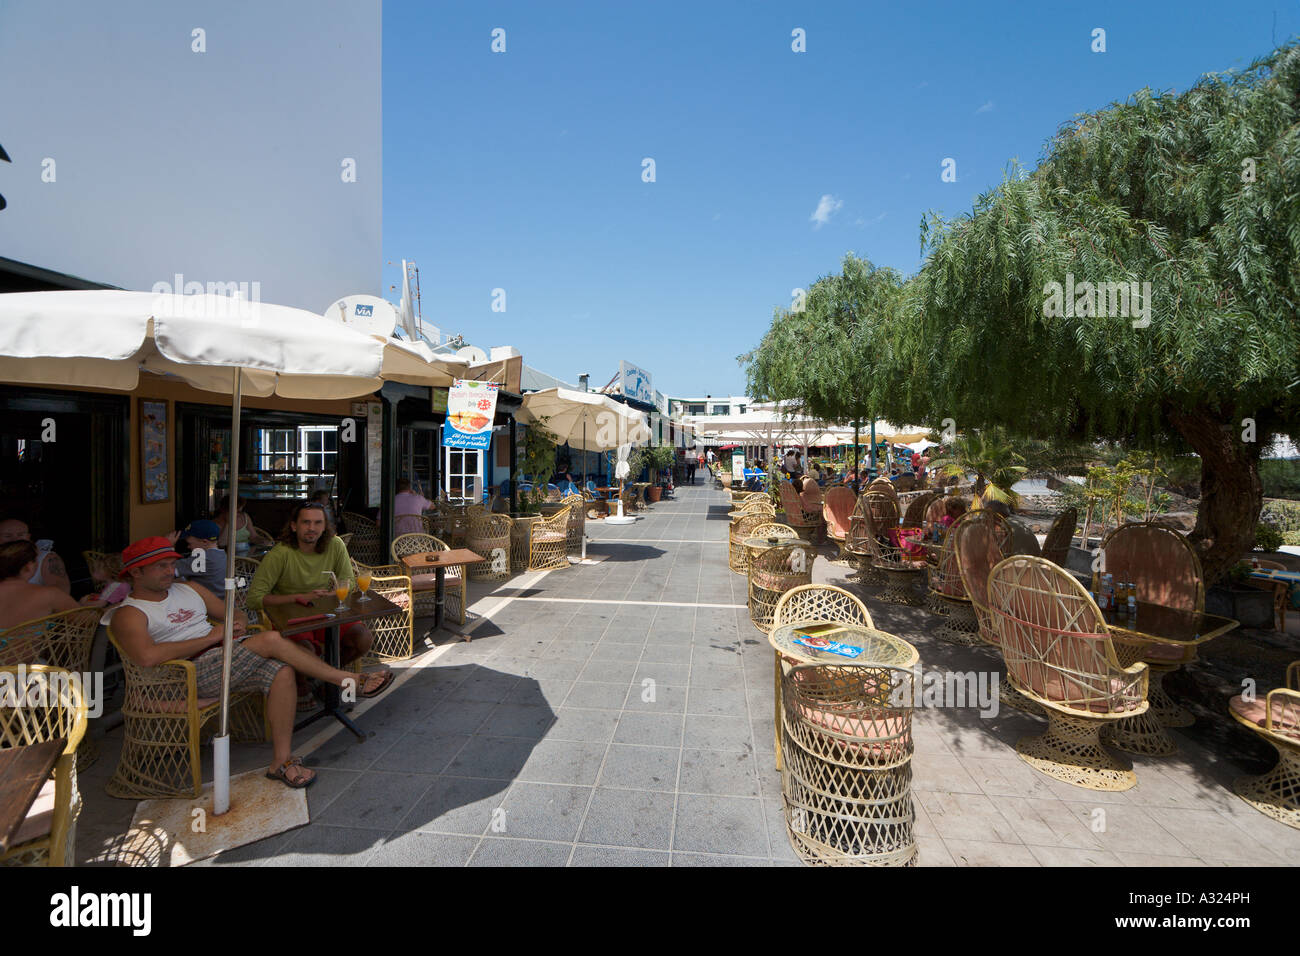 Sidewalk cafe in the shopping centre at Playa de las Cucharas, Costa Teguise, Lanzarote, Canary Islands, Spain Stock Photo